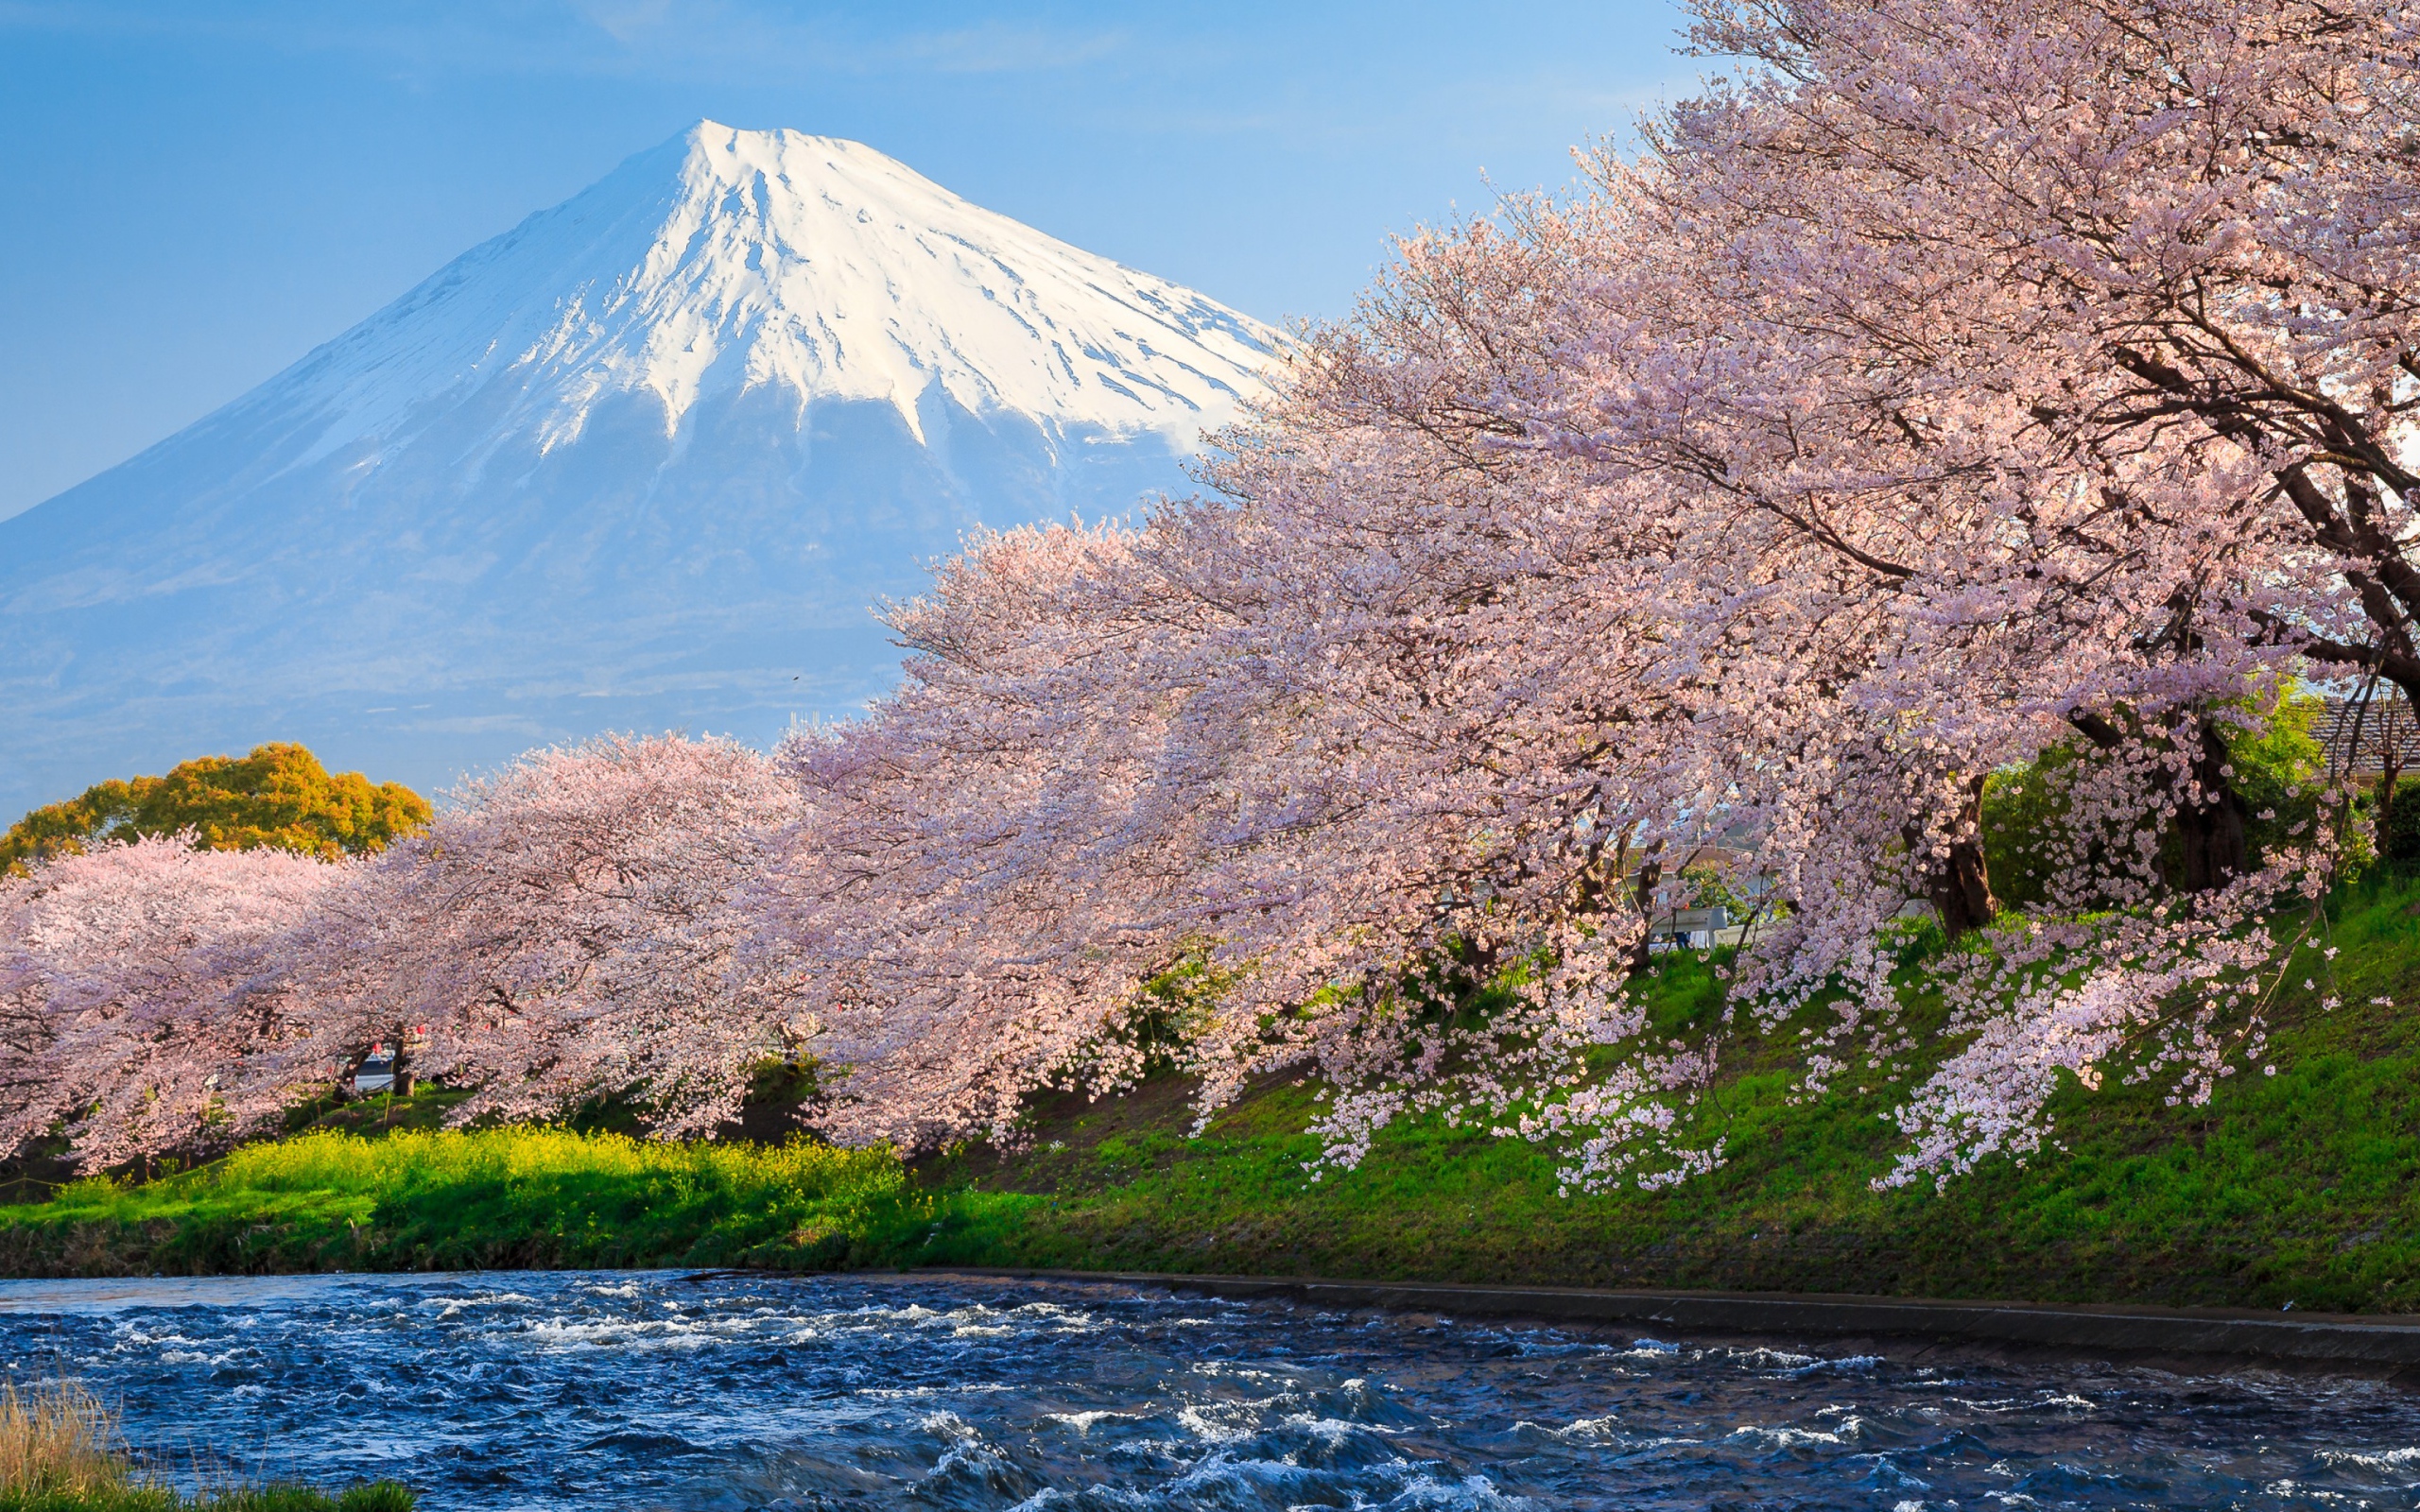 Pink flowering sakura trees by the river against the background of Mount Fuji, Japan